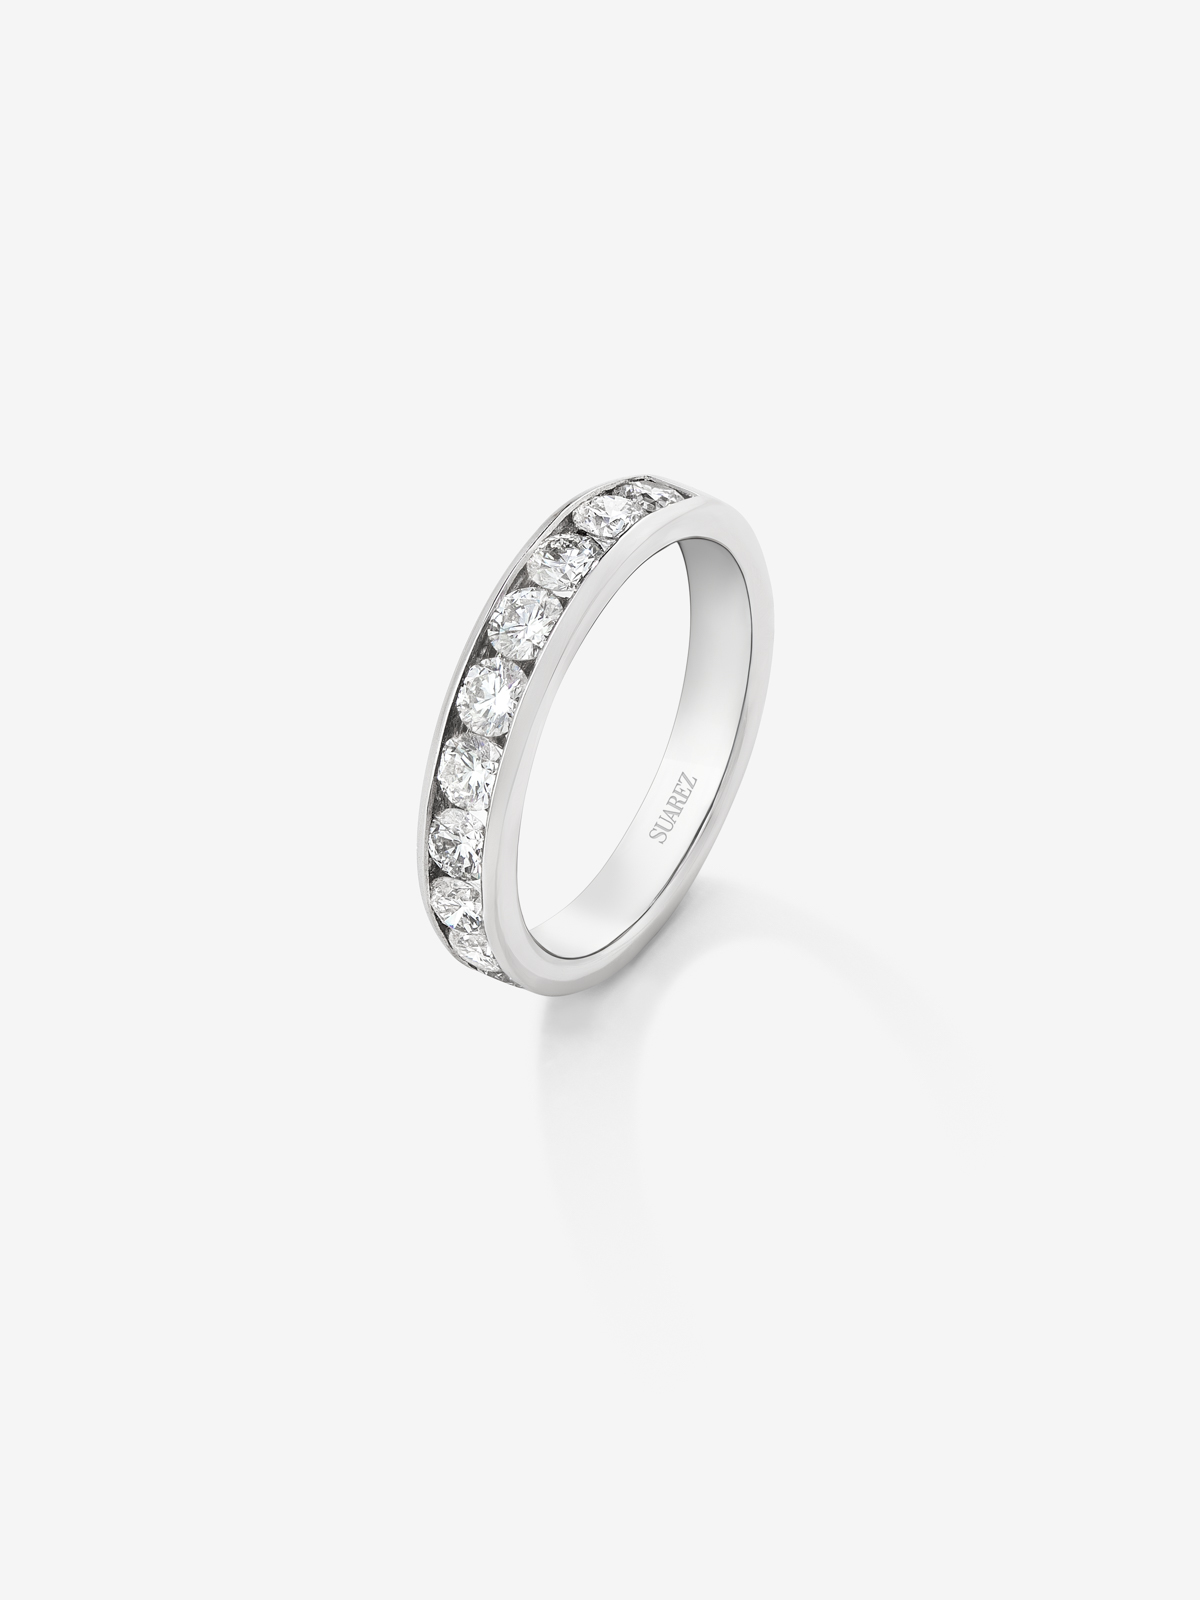 18K White Gold Commitment Media Ring with Band Diamonds